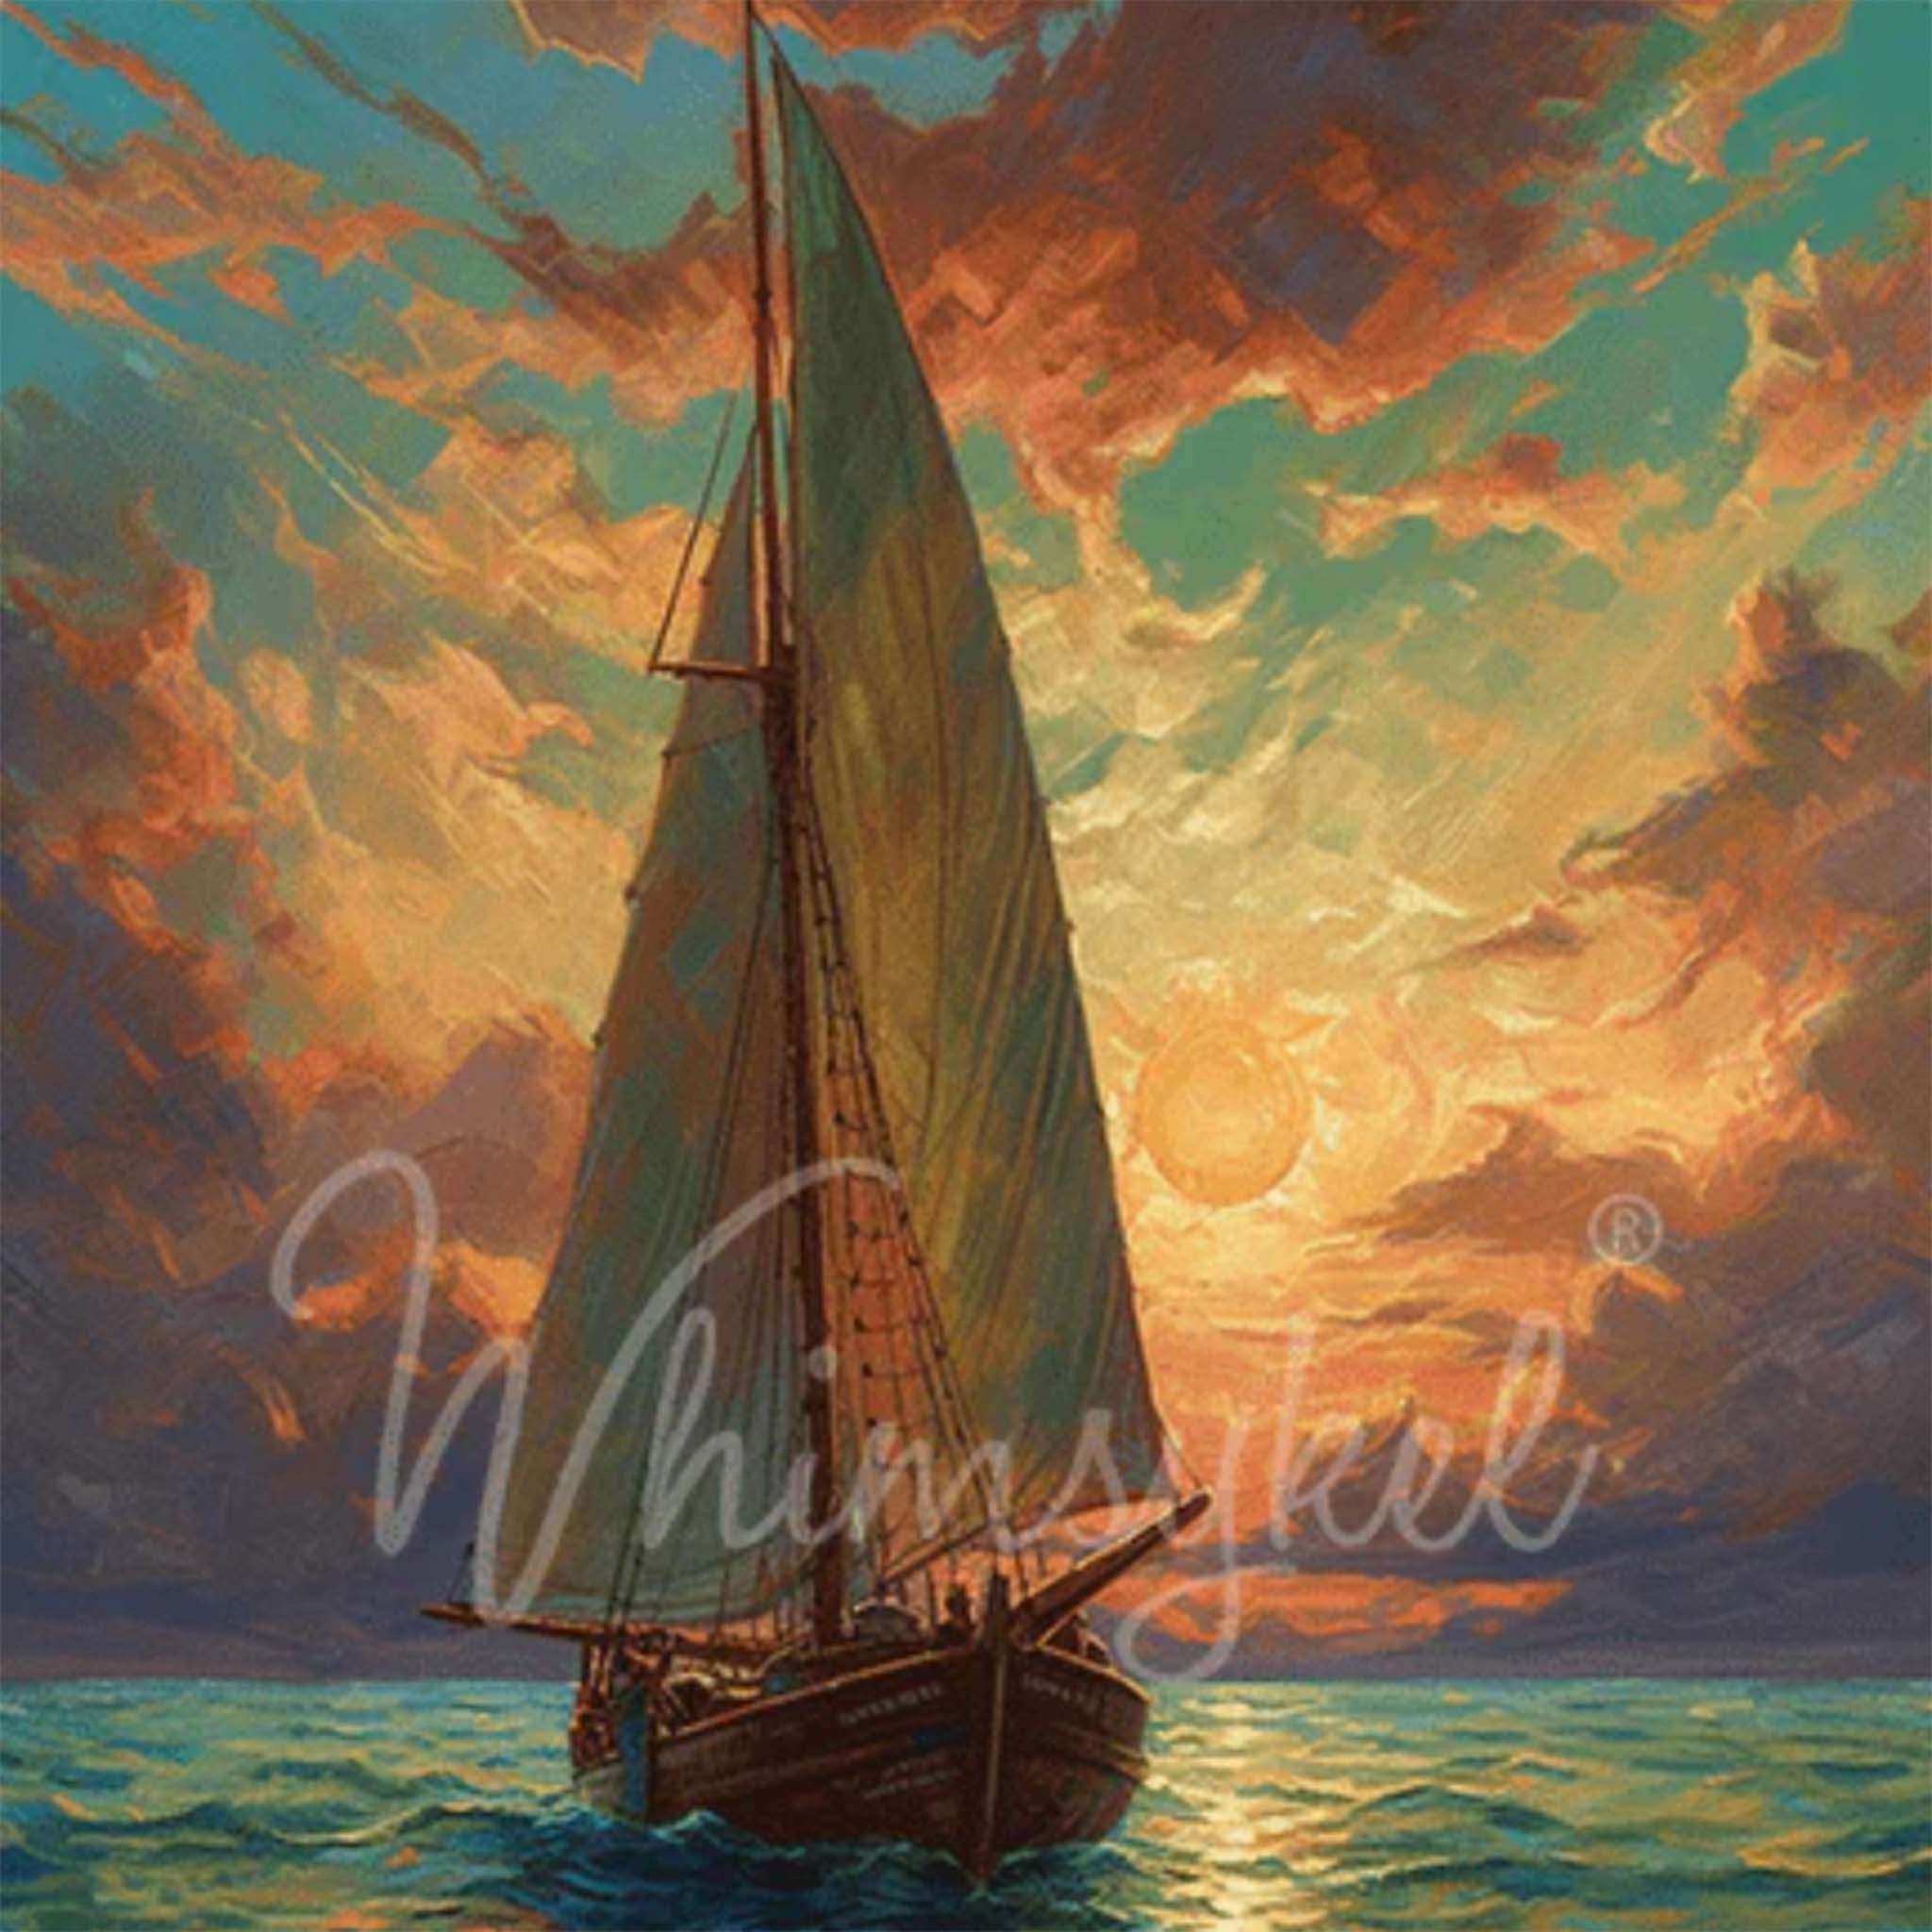 A close-up of a tissue paper that features a painting of a sailboat in the sunset.